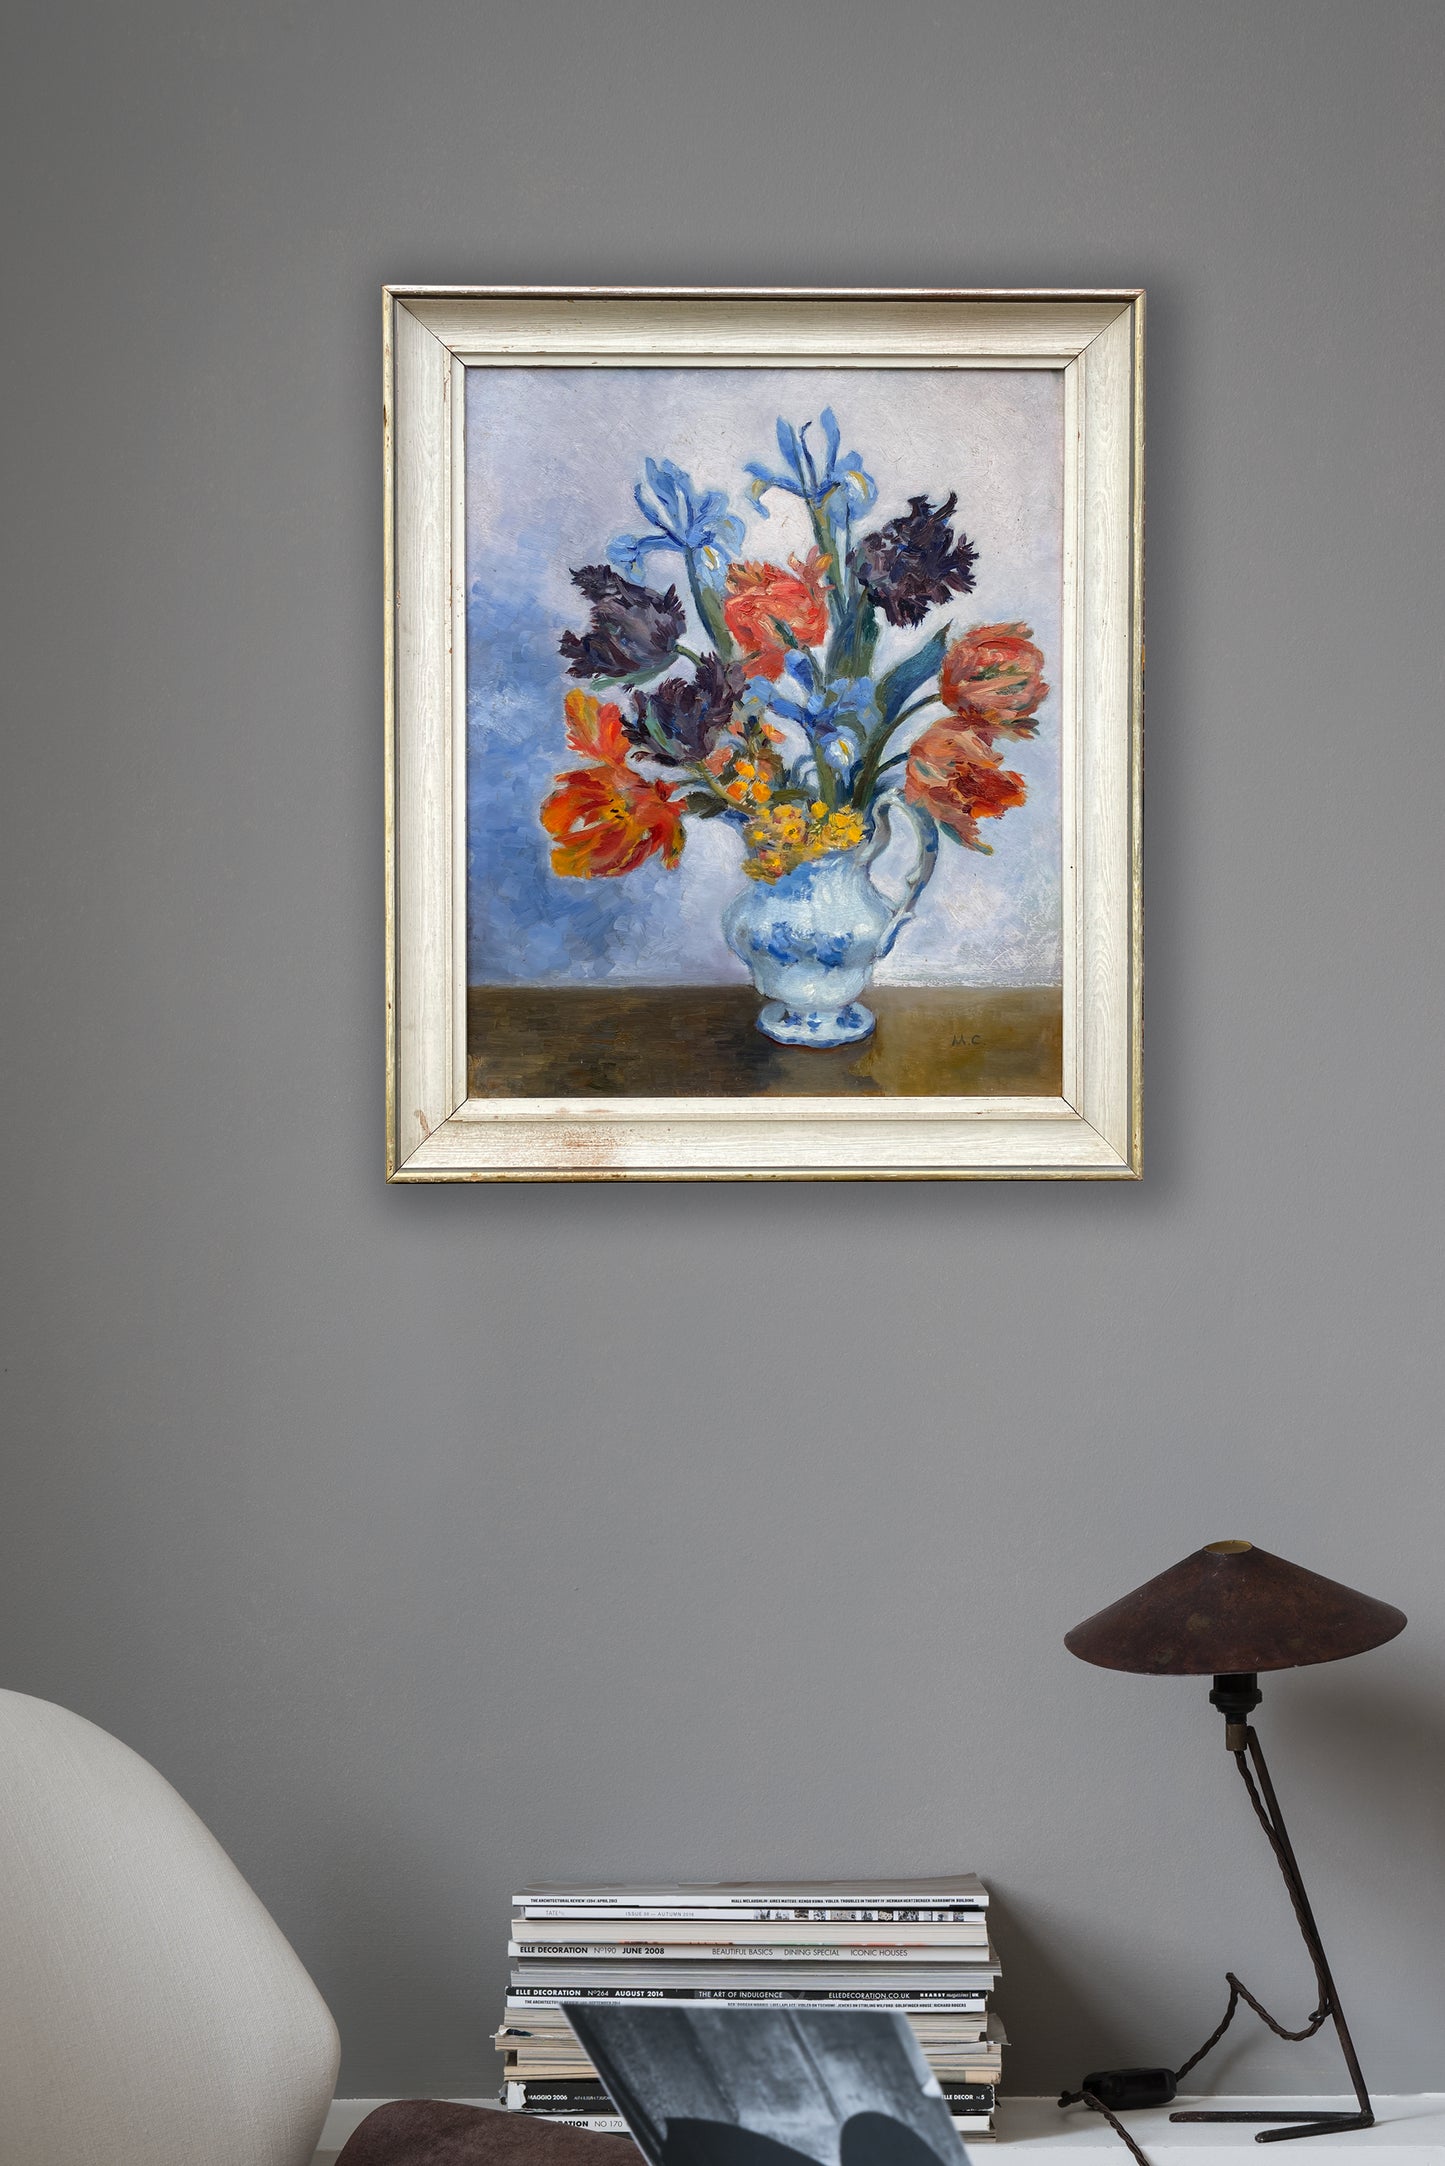 English Framed Oil on Board 'Tulips and Iris in a Blue/White Jug' Signed c1960